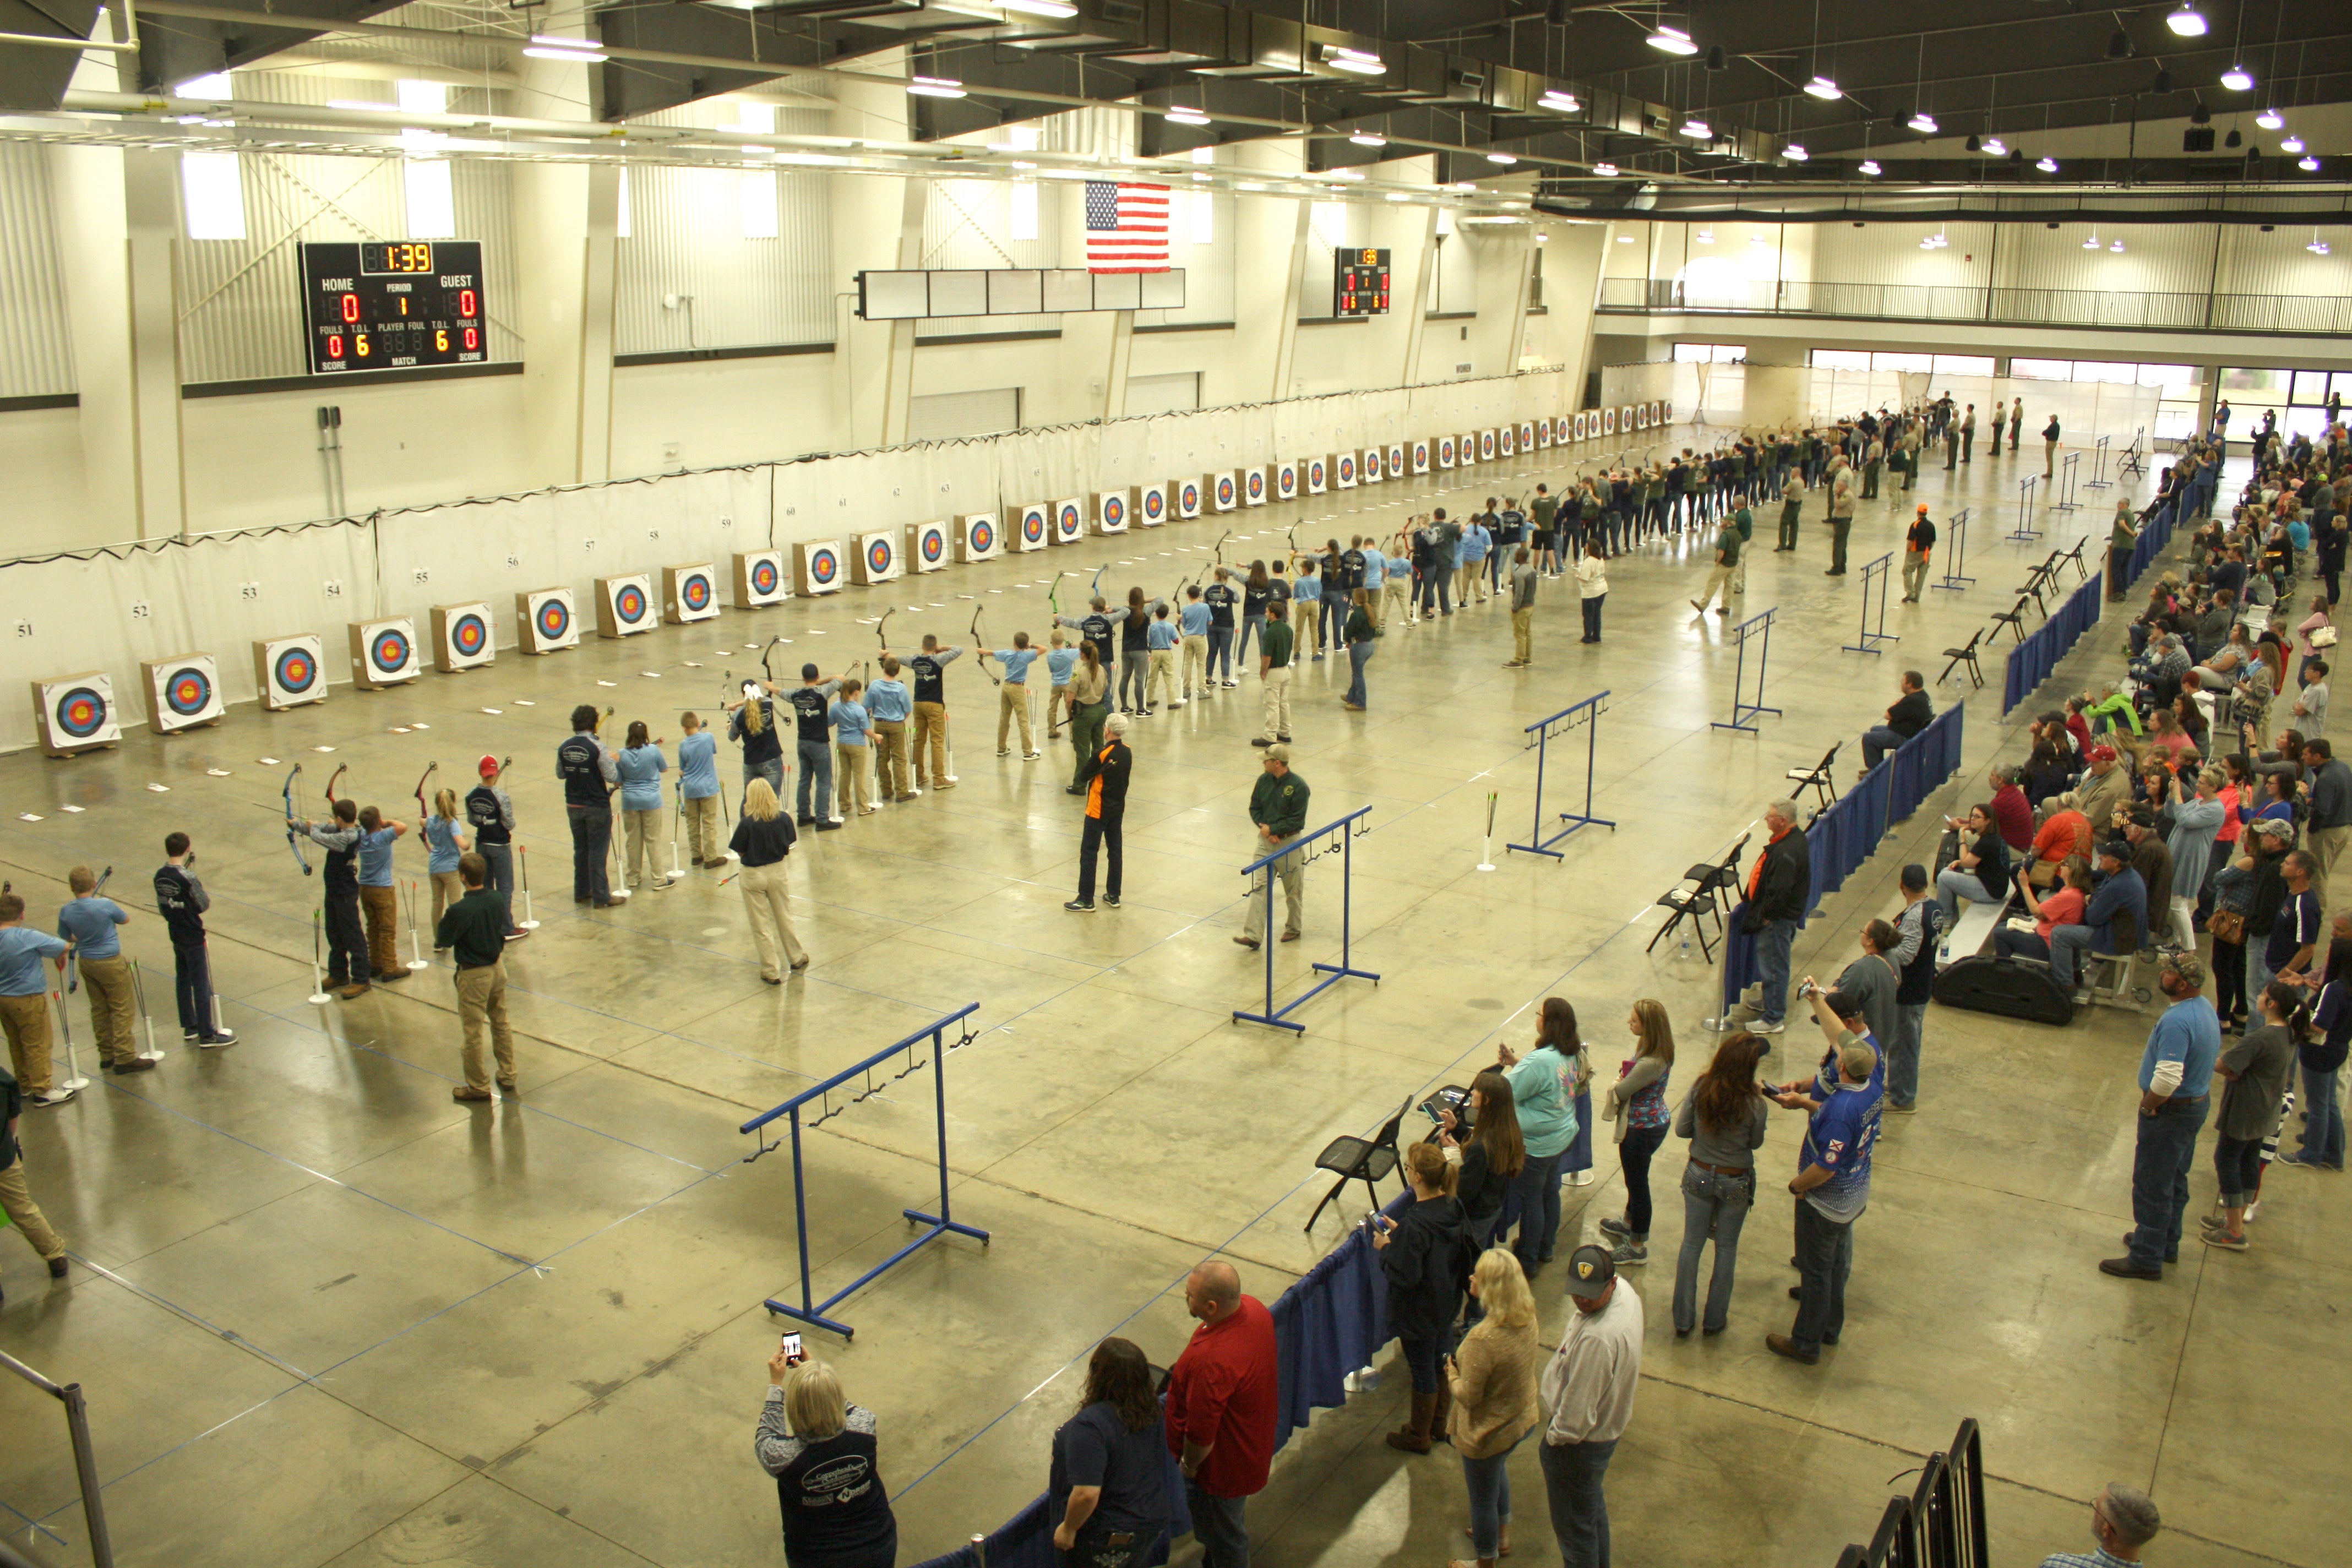 The sound of the opening whistle sent hundreds of arrows zipping toward their targets at the National Archery in the Schools (NASP) State Championship in Montgomery, Ala., on Friday, April 6. By the end of the competition, 54 youth archery teams had qualified to attend the NASP Eastern National Championship on May 10-12, in Louisville, Ky. Of those qualifying teams, 41 have registered to attend the national event.